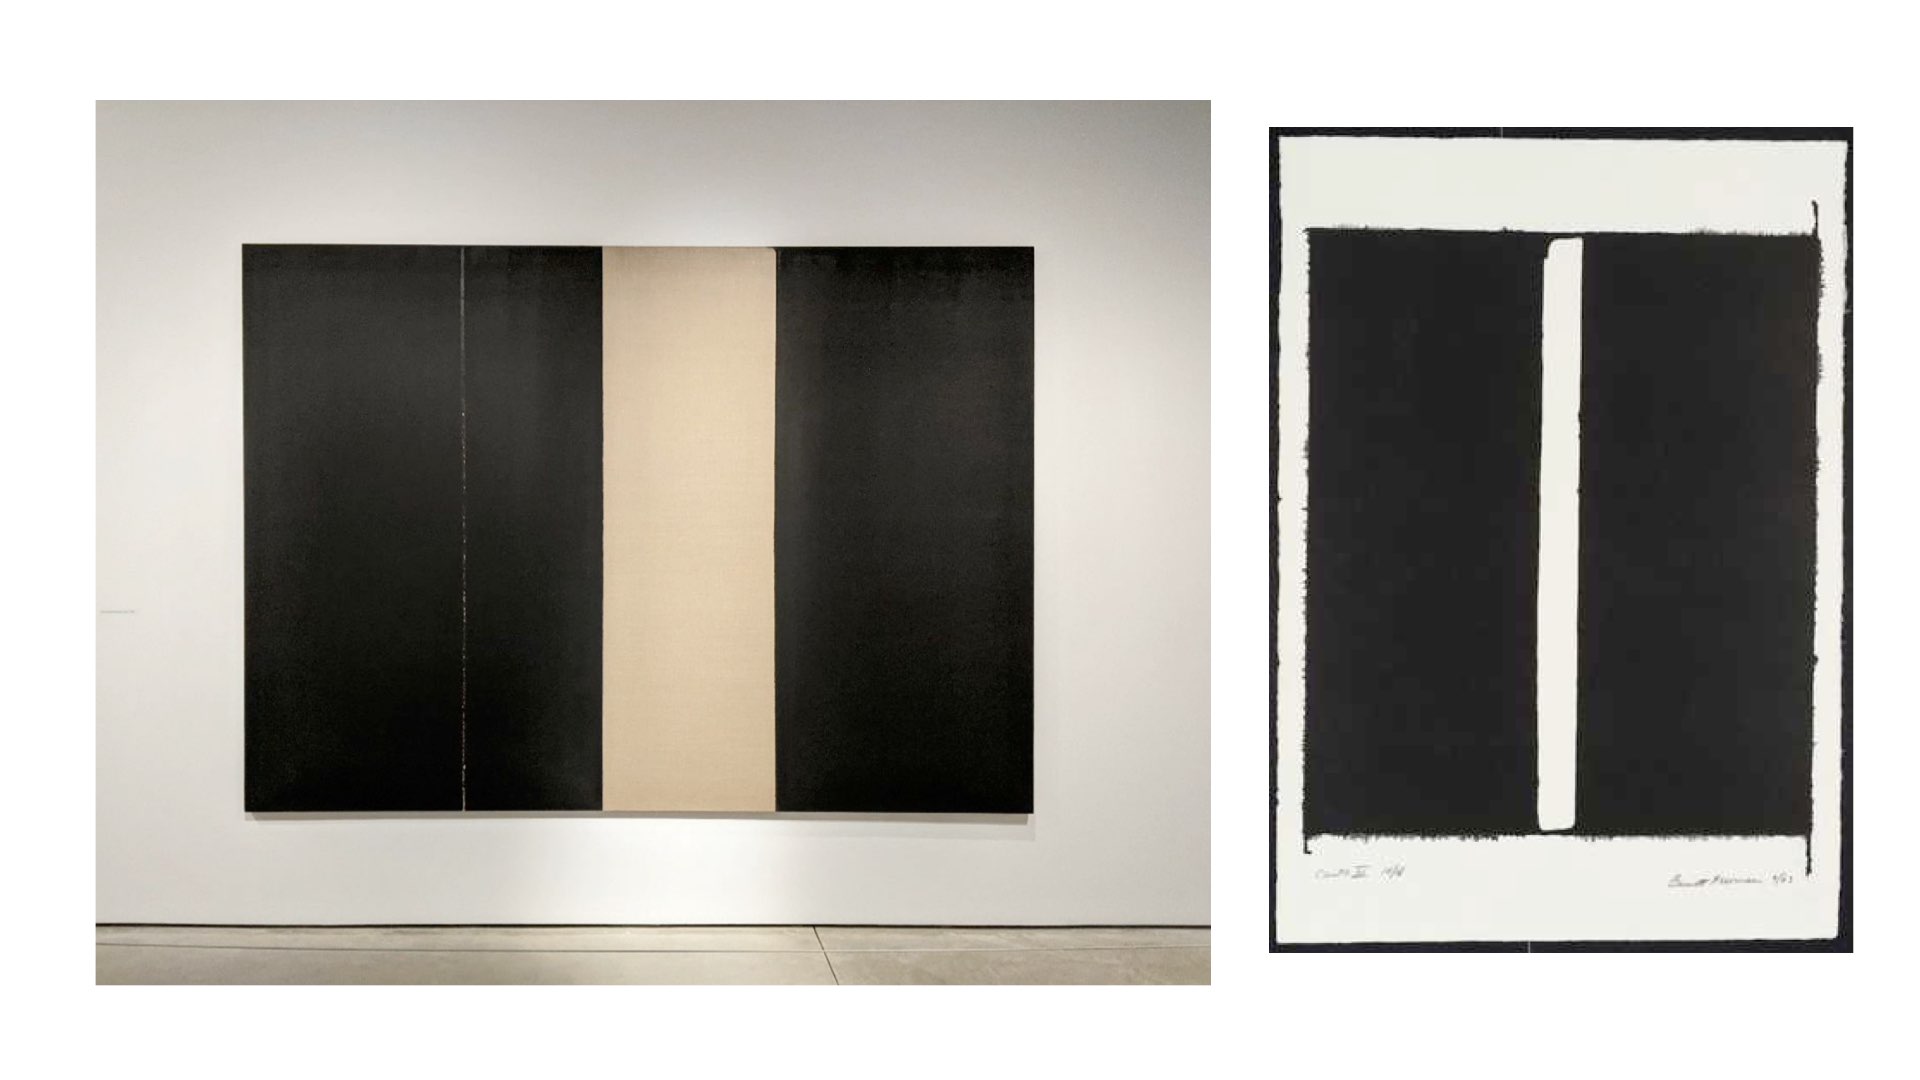 A painting by Yun Hyong-keun alongside a print by Barnett Newman, both abstract and rectilinear